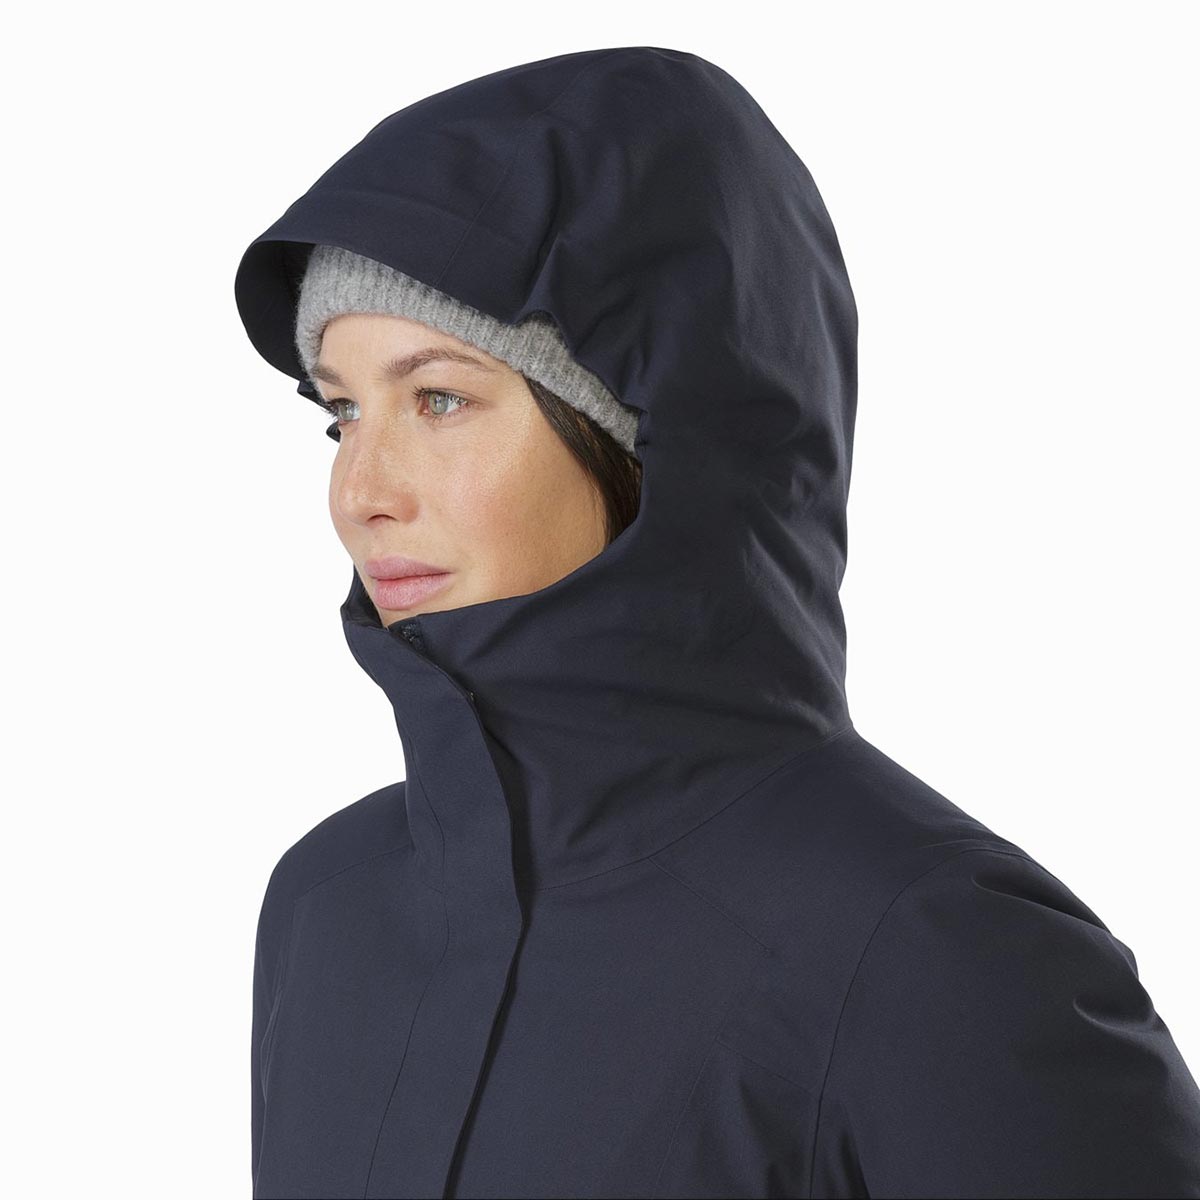 Arc'teryx Centrale Parka, women's, discontinued Fall 2018 colors (free ...